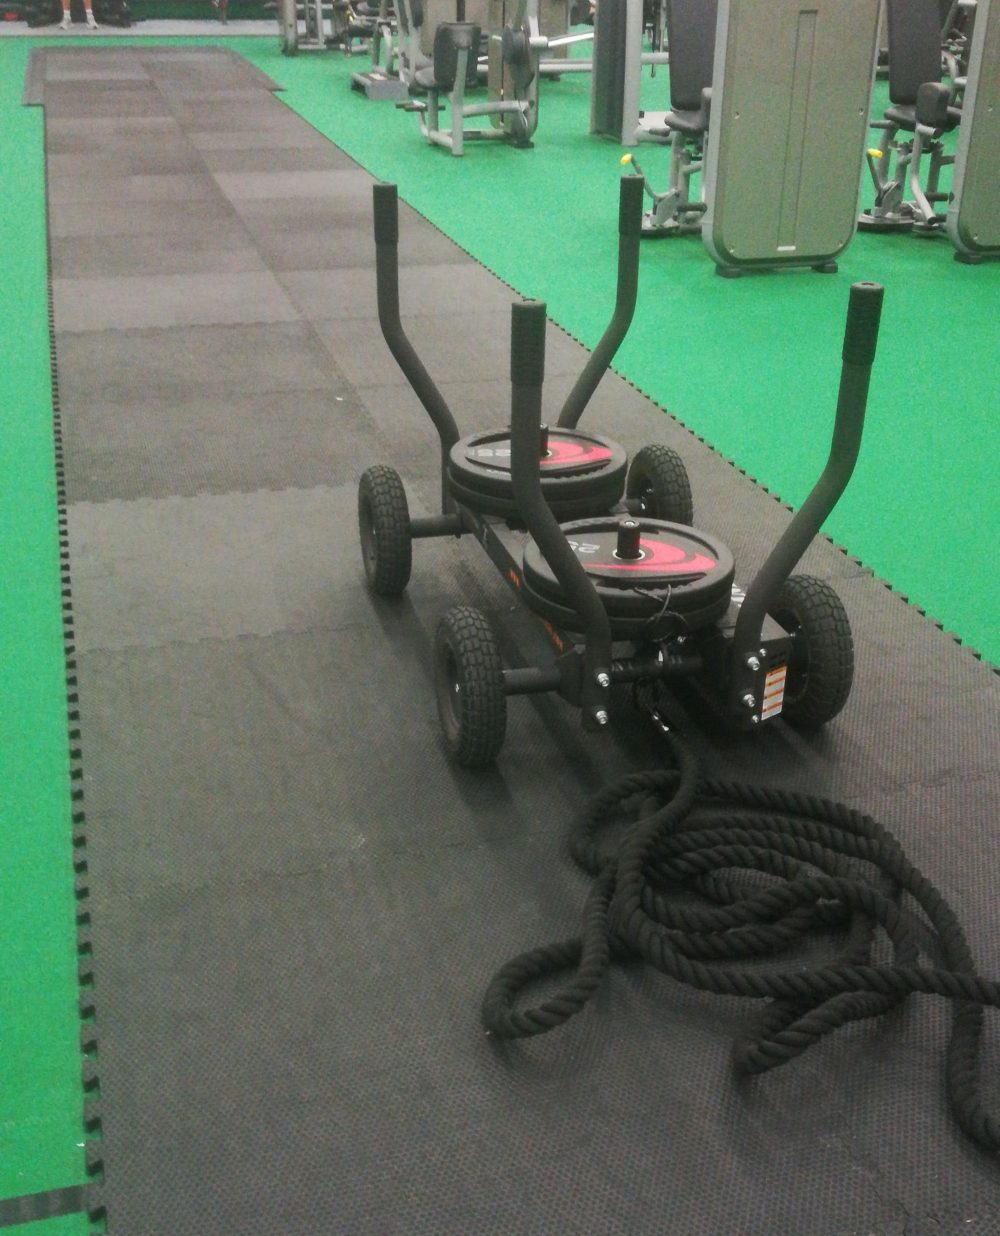 group fitness workouts sled